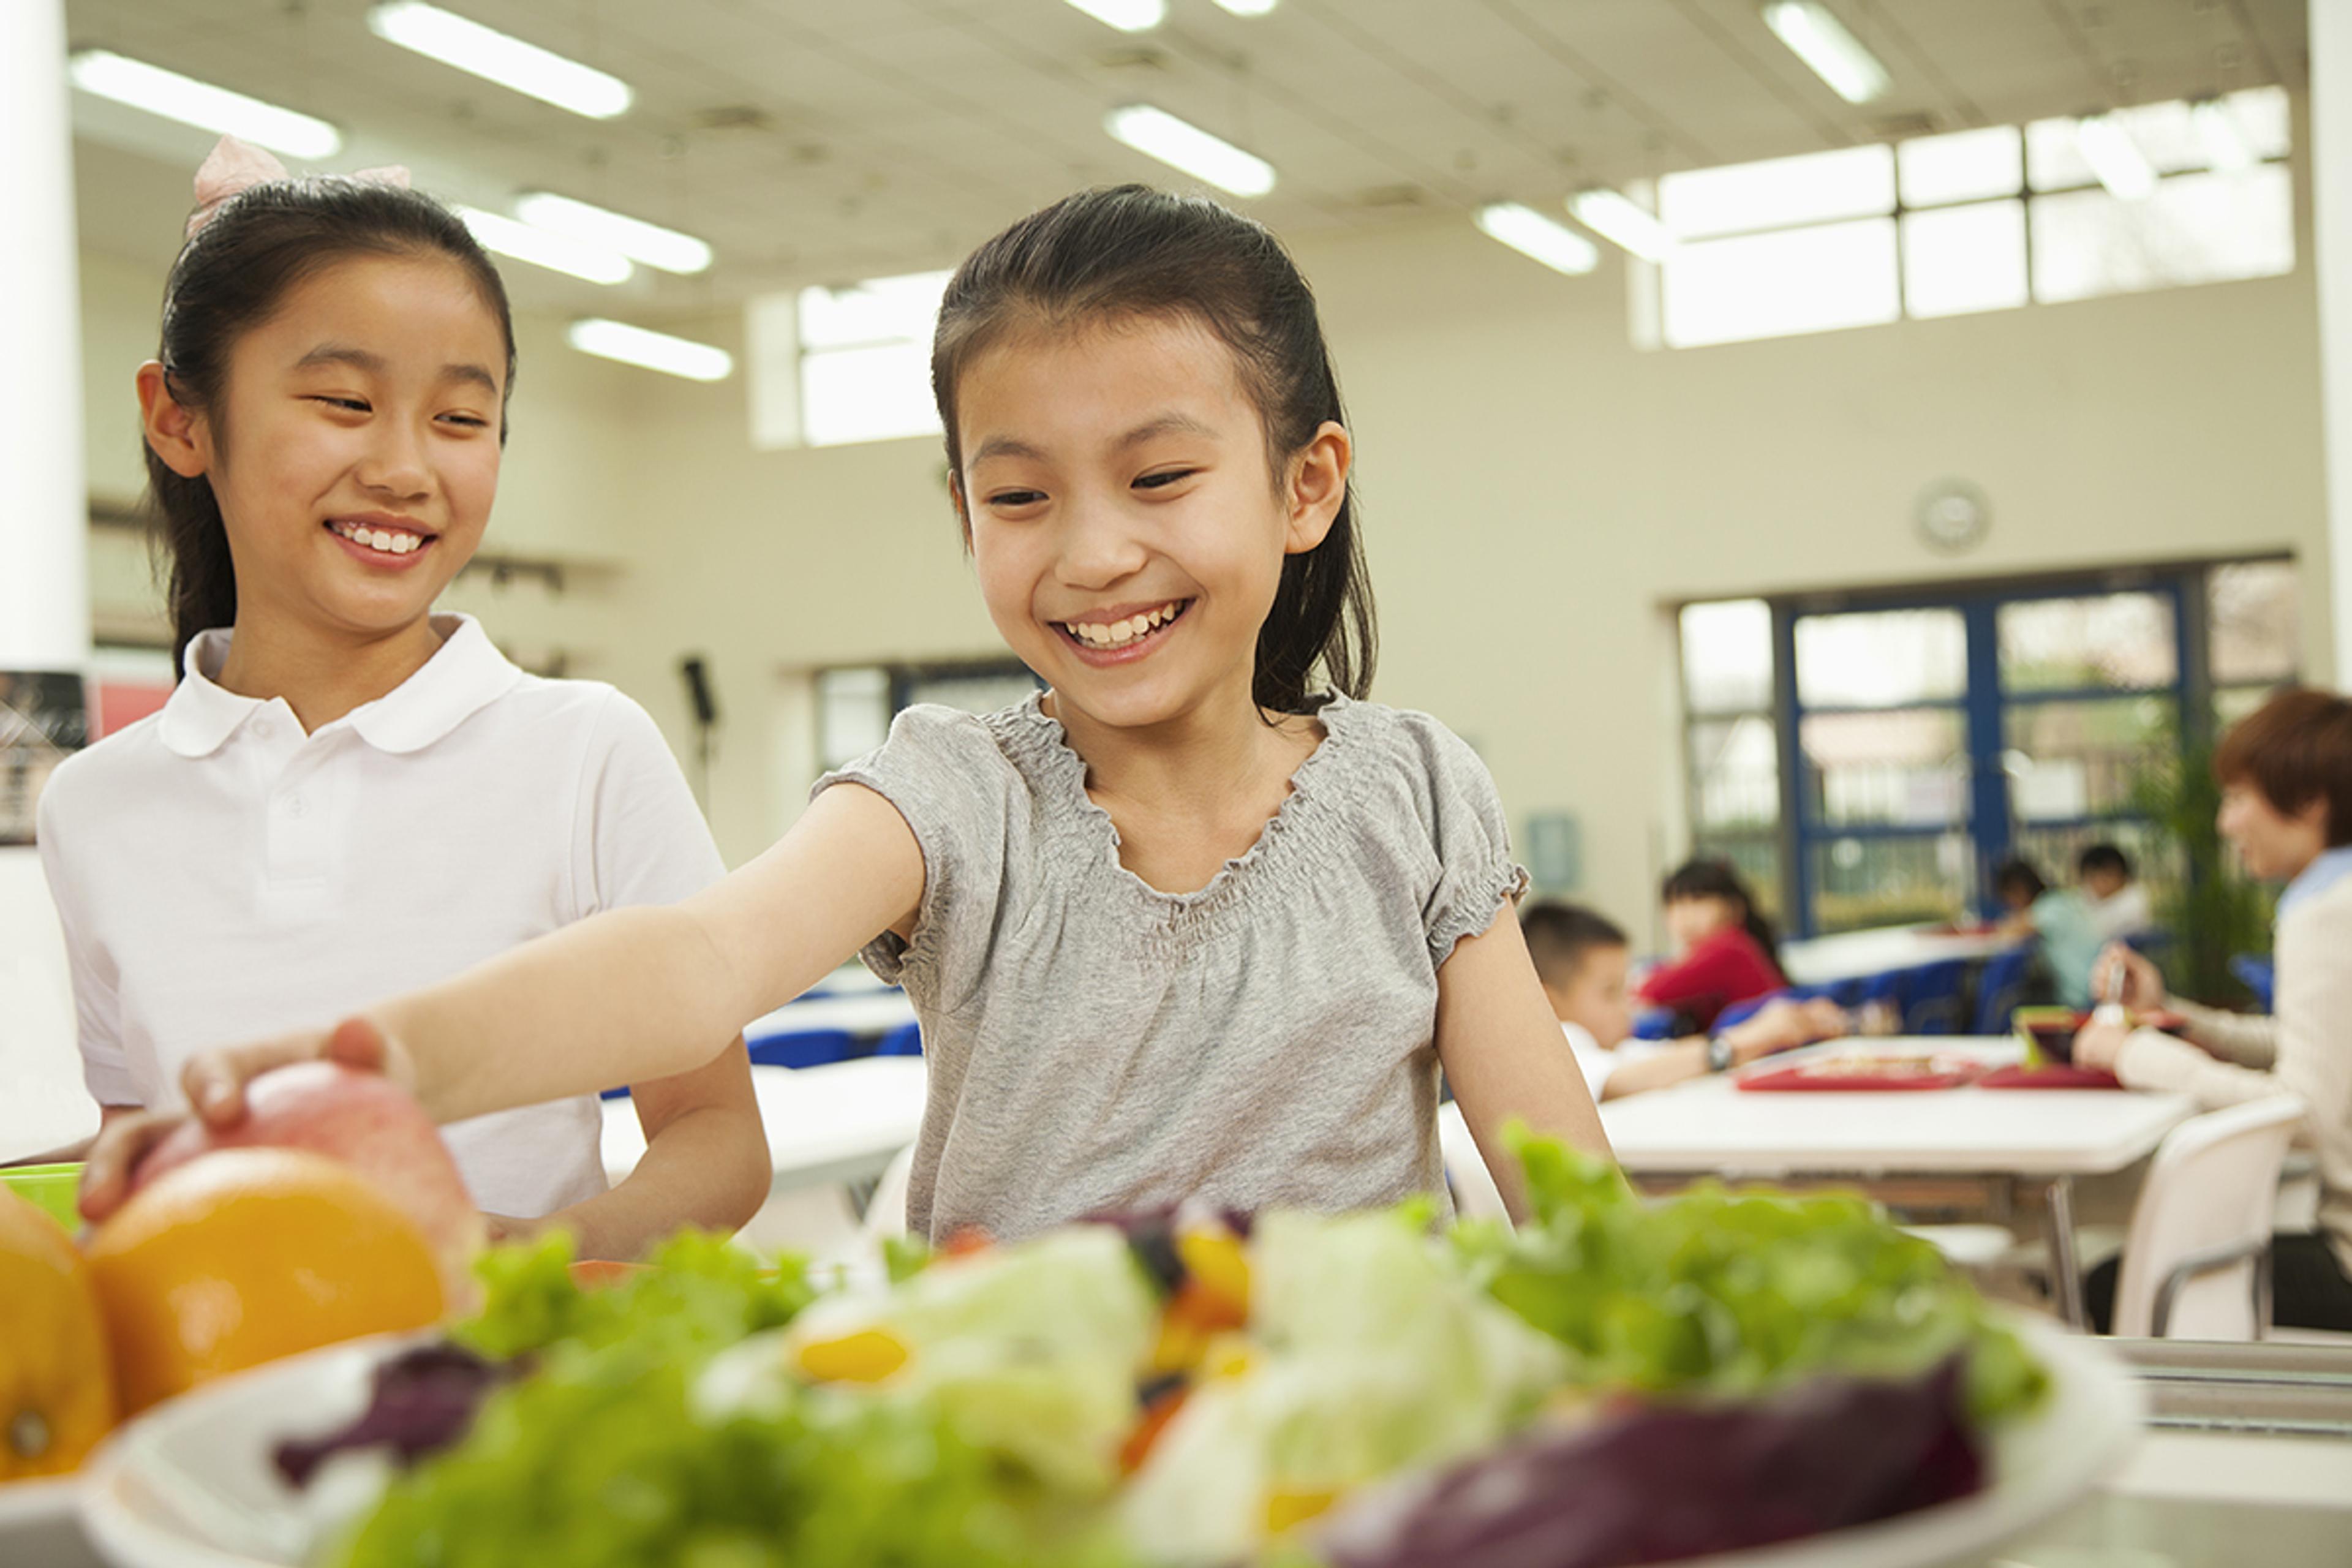 Two young girls smile while taking fresh foods from their school lunch salad bar.